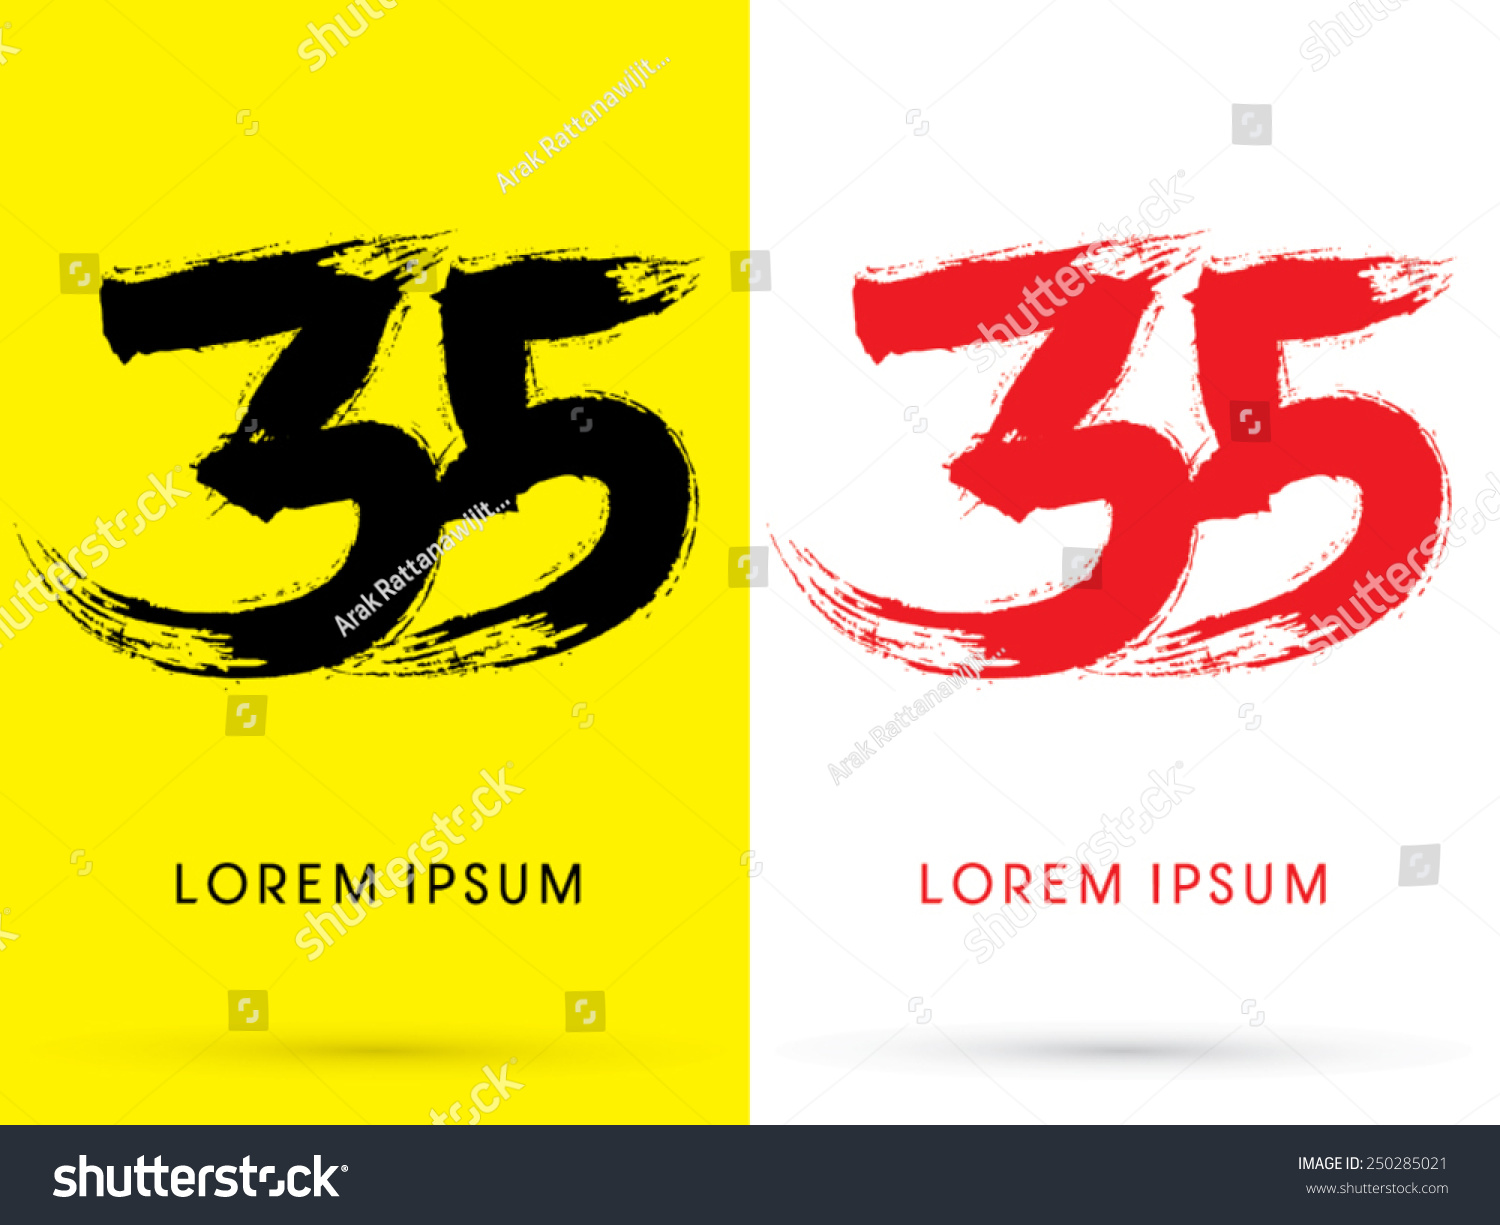 SVG of 35 ,Number,Chinese brush grunge font ,designed using black and red brush handwriting, logo, symbol, icon, graphic, vector. svg